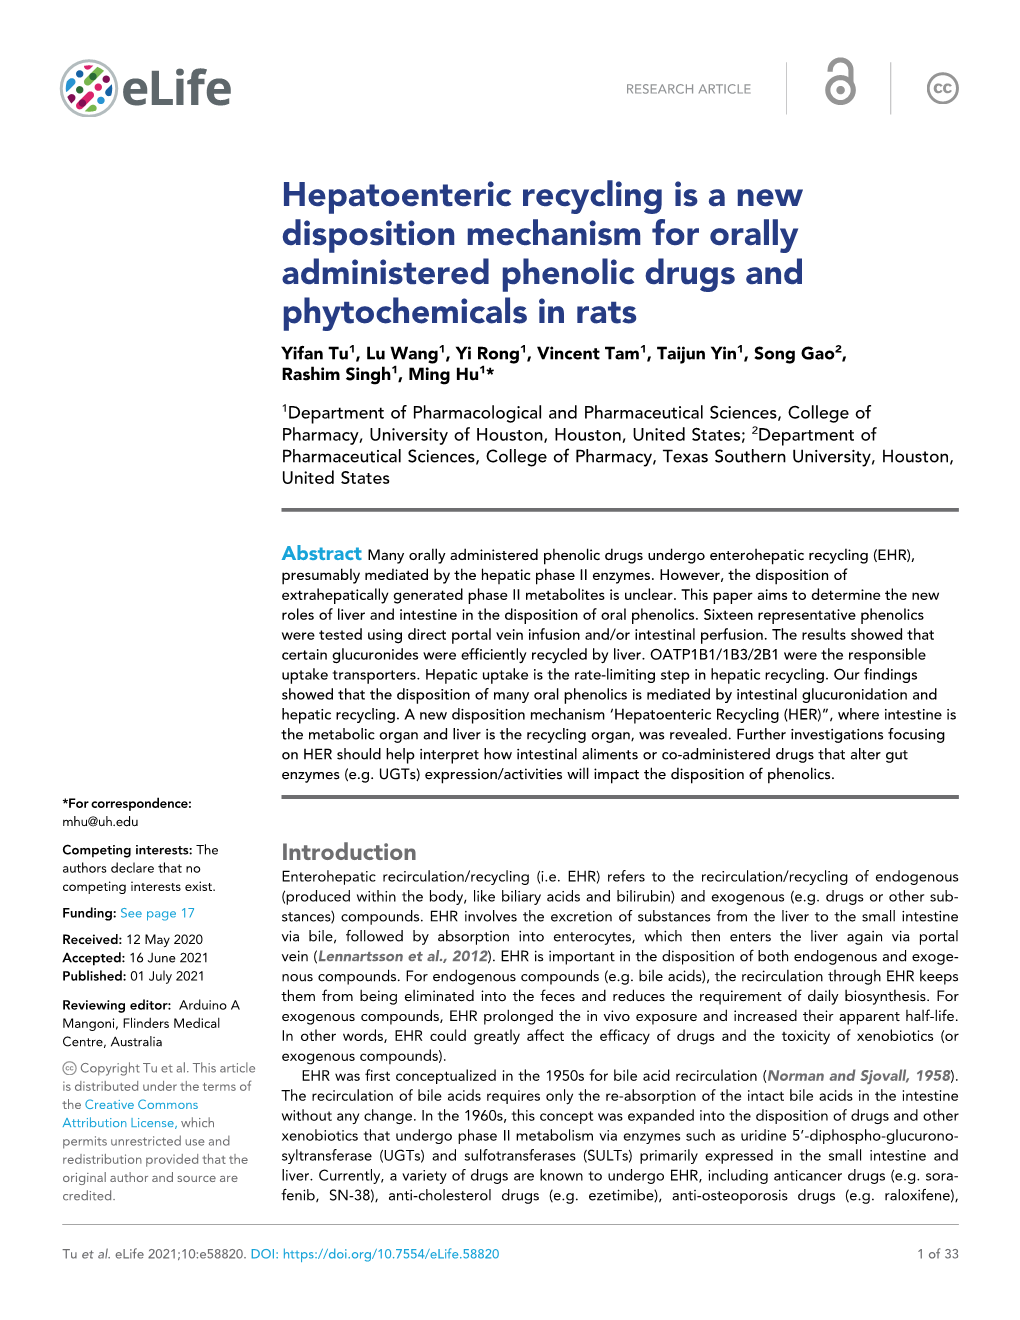 Hepatoenteric Recycling Is a New Disposition Mechanism for Orally Administered Phenolic Drugs and Phytochemicals in Rats